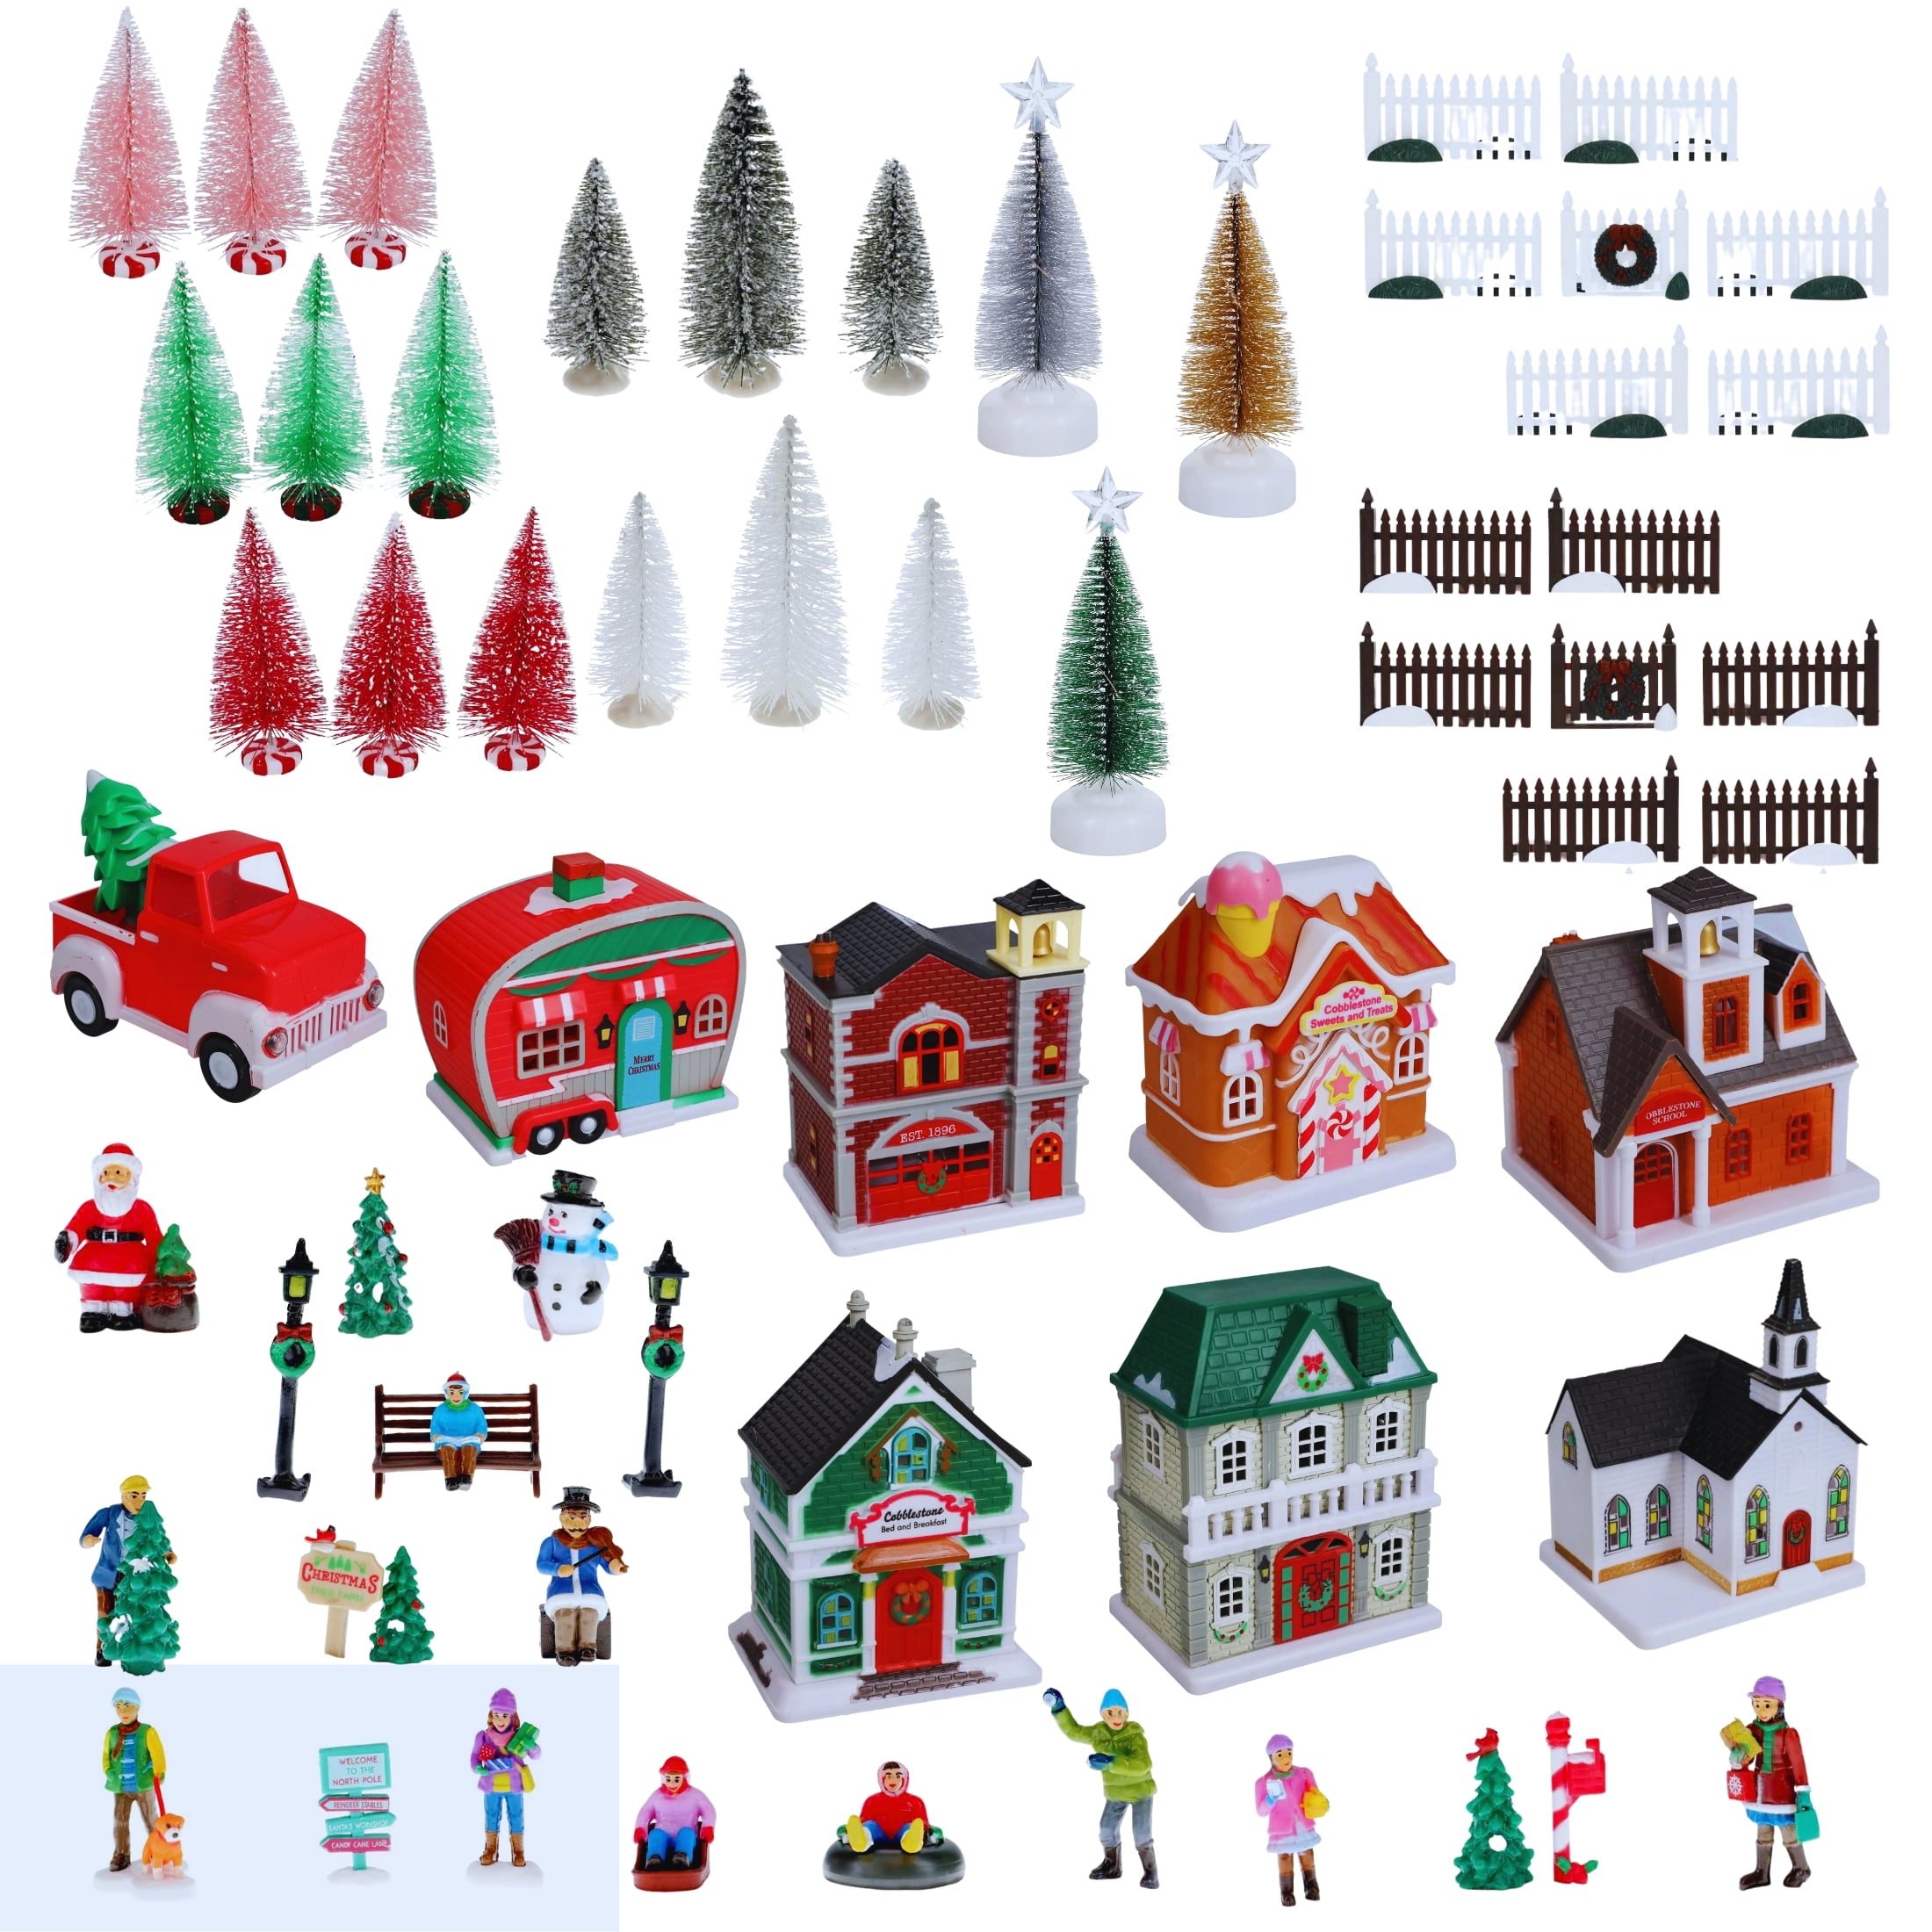 Cobblestone Corners 2022 Christmas Village - 62-Piece Collection Set -  Plastic LED Light-Up Buildings Polyresin Figurines Holiday Craft Ornaments